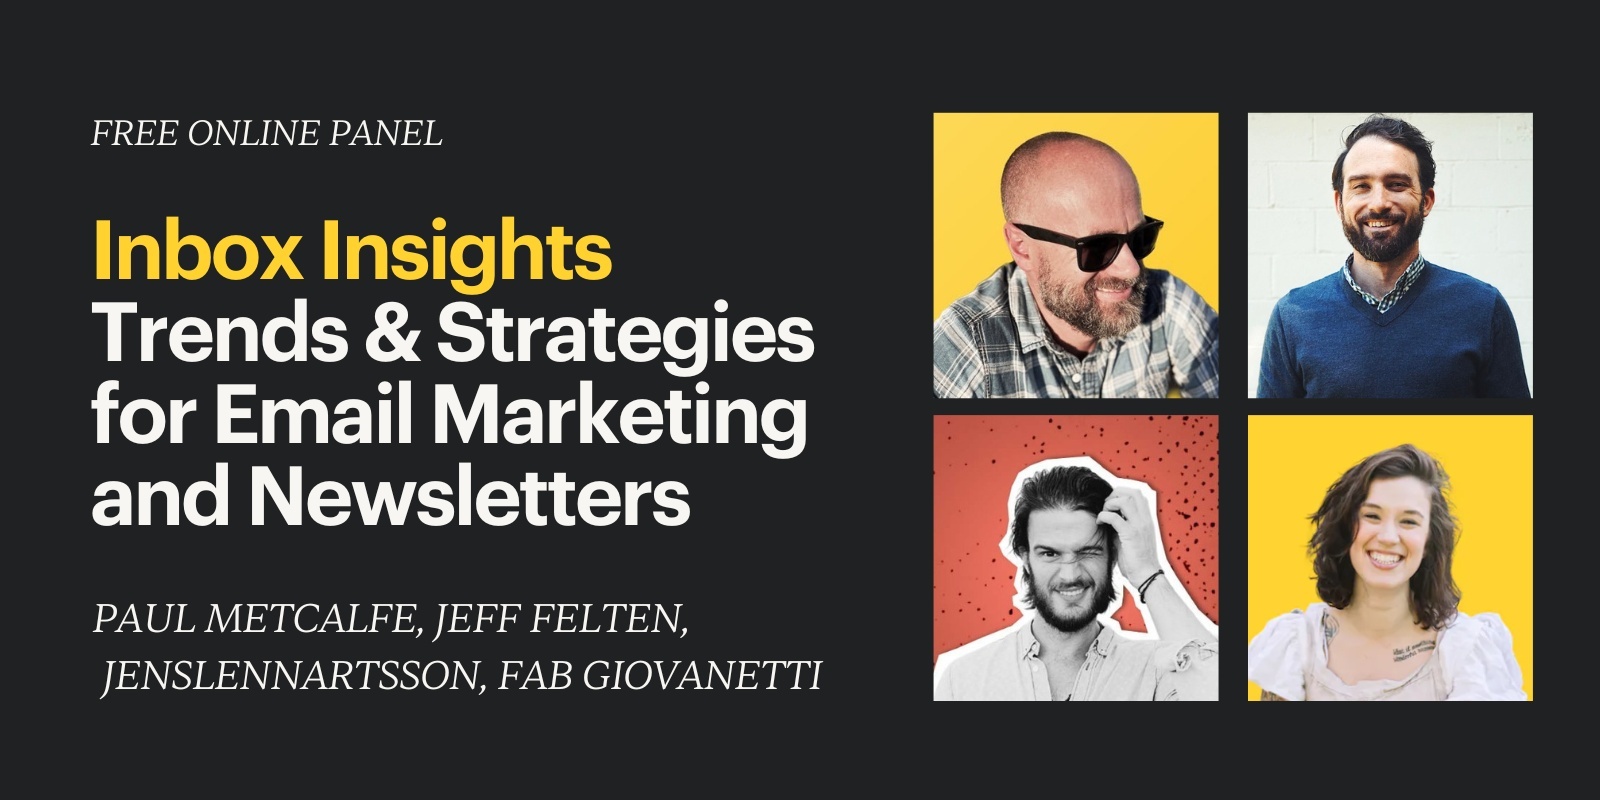 Panel: Trends & Strategies for Email Marketing and Newsletters